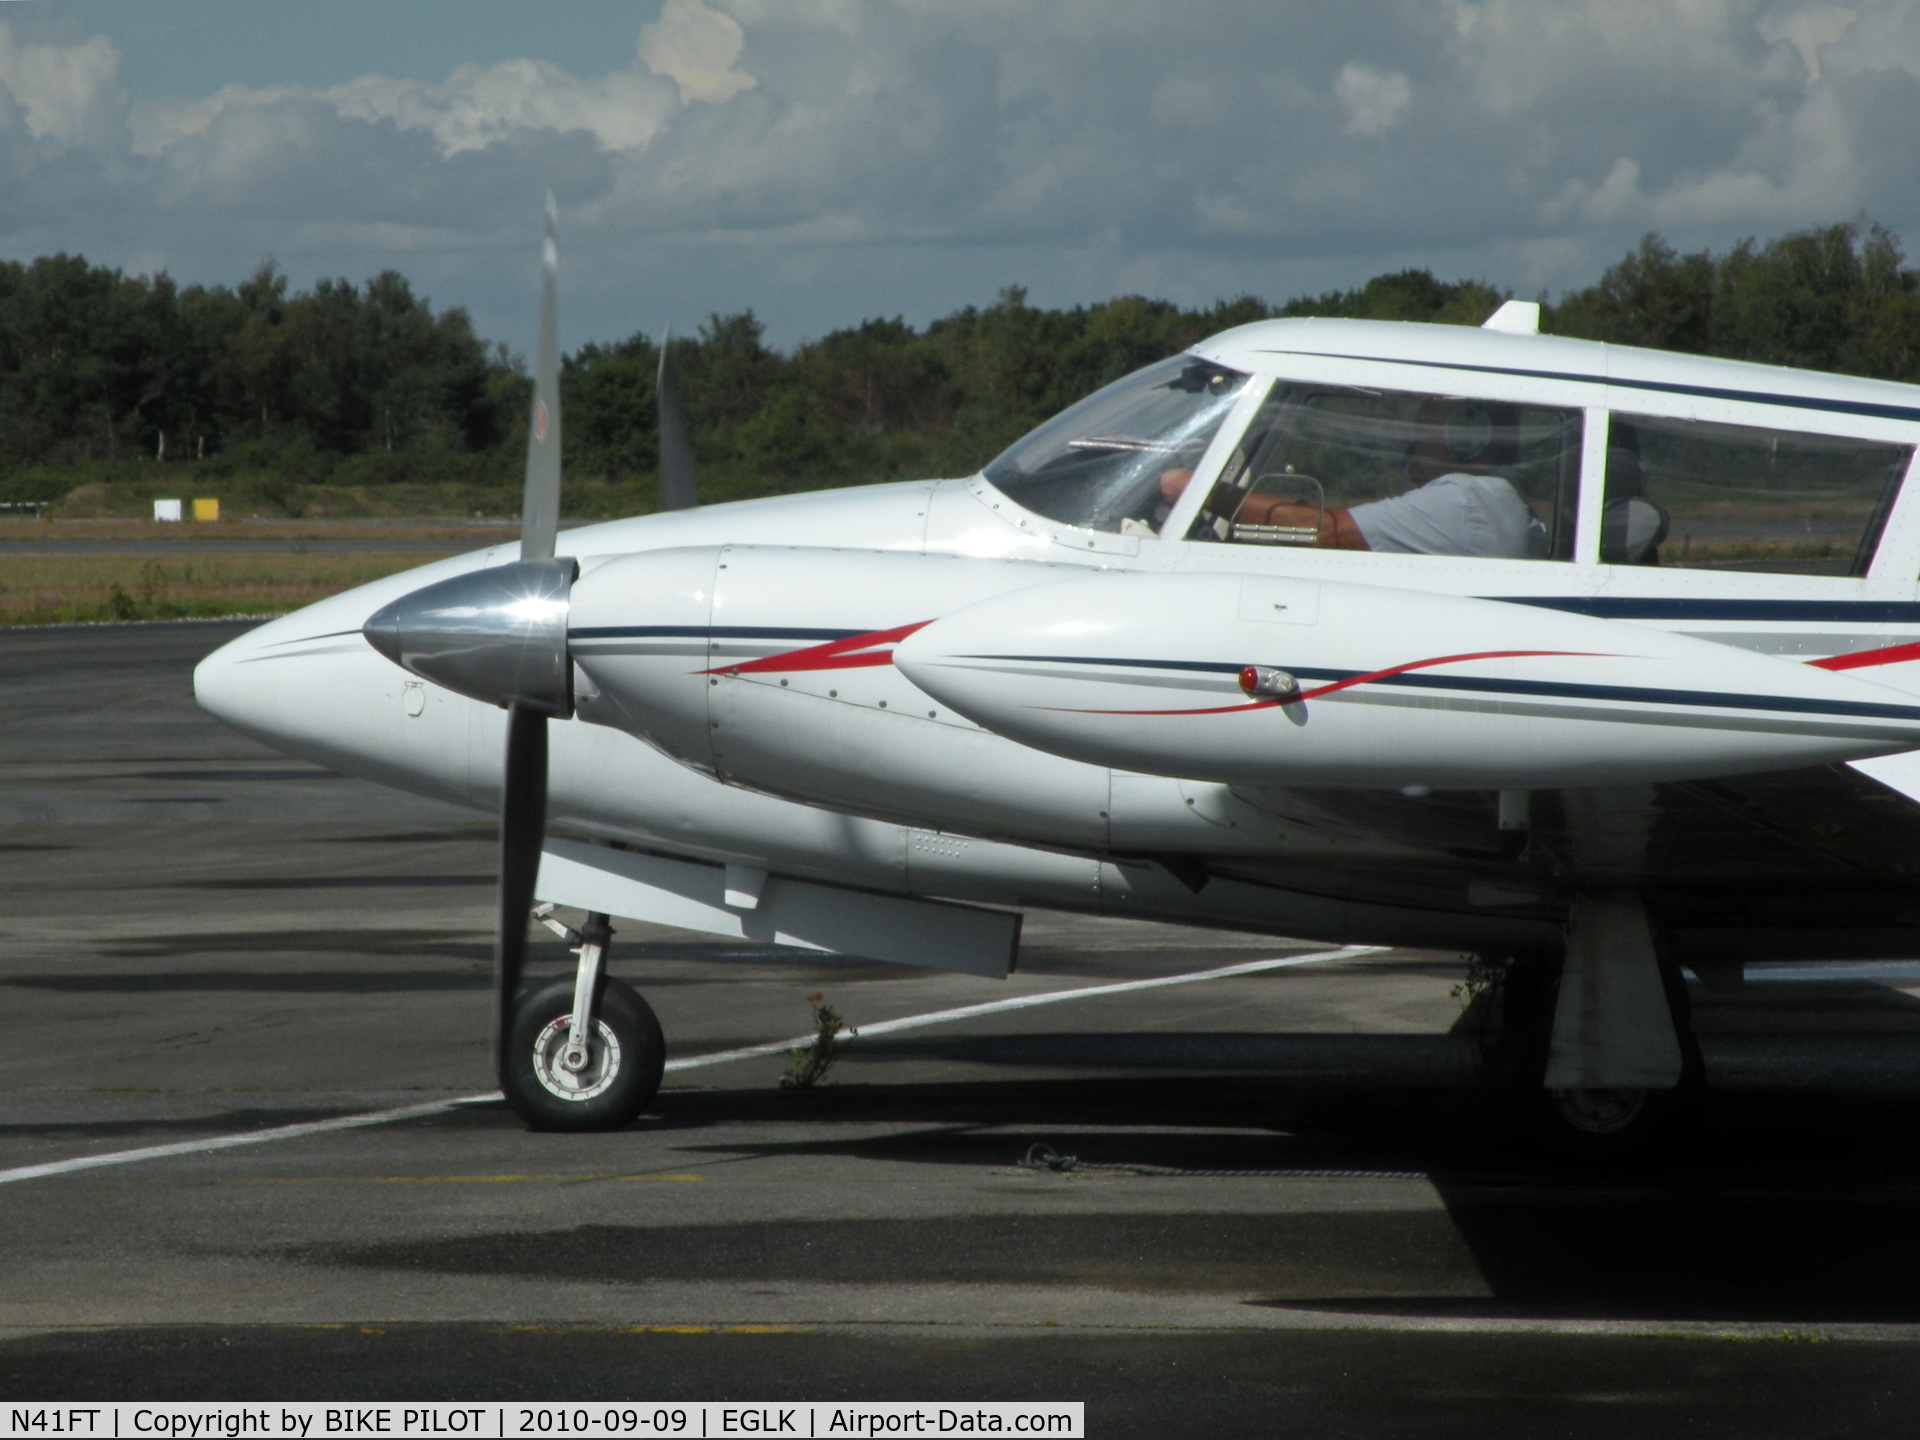 N41FT, 1970 Piper PA-39 Twin Comanche C/N 39-59, Smart Twin Commanche just after start up.